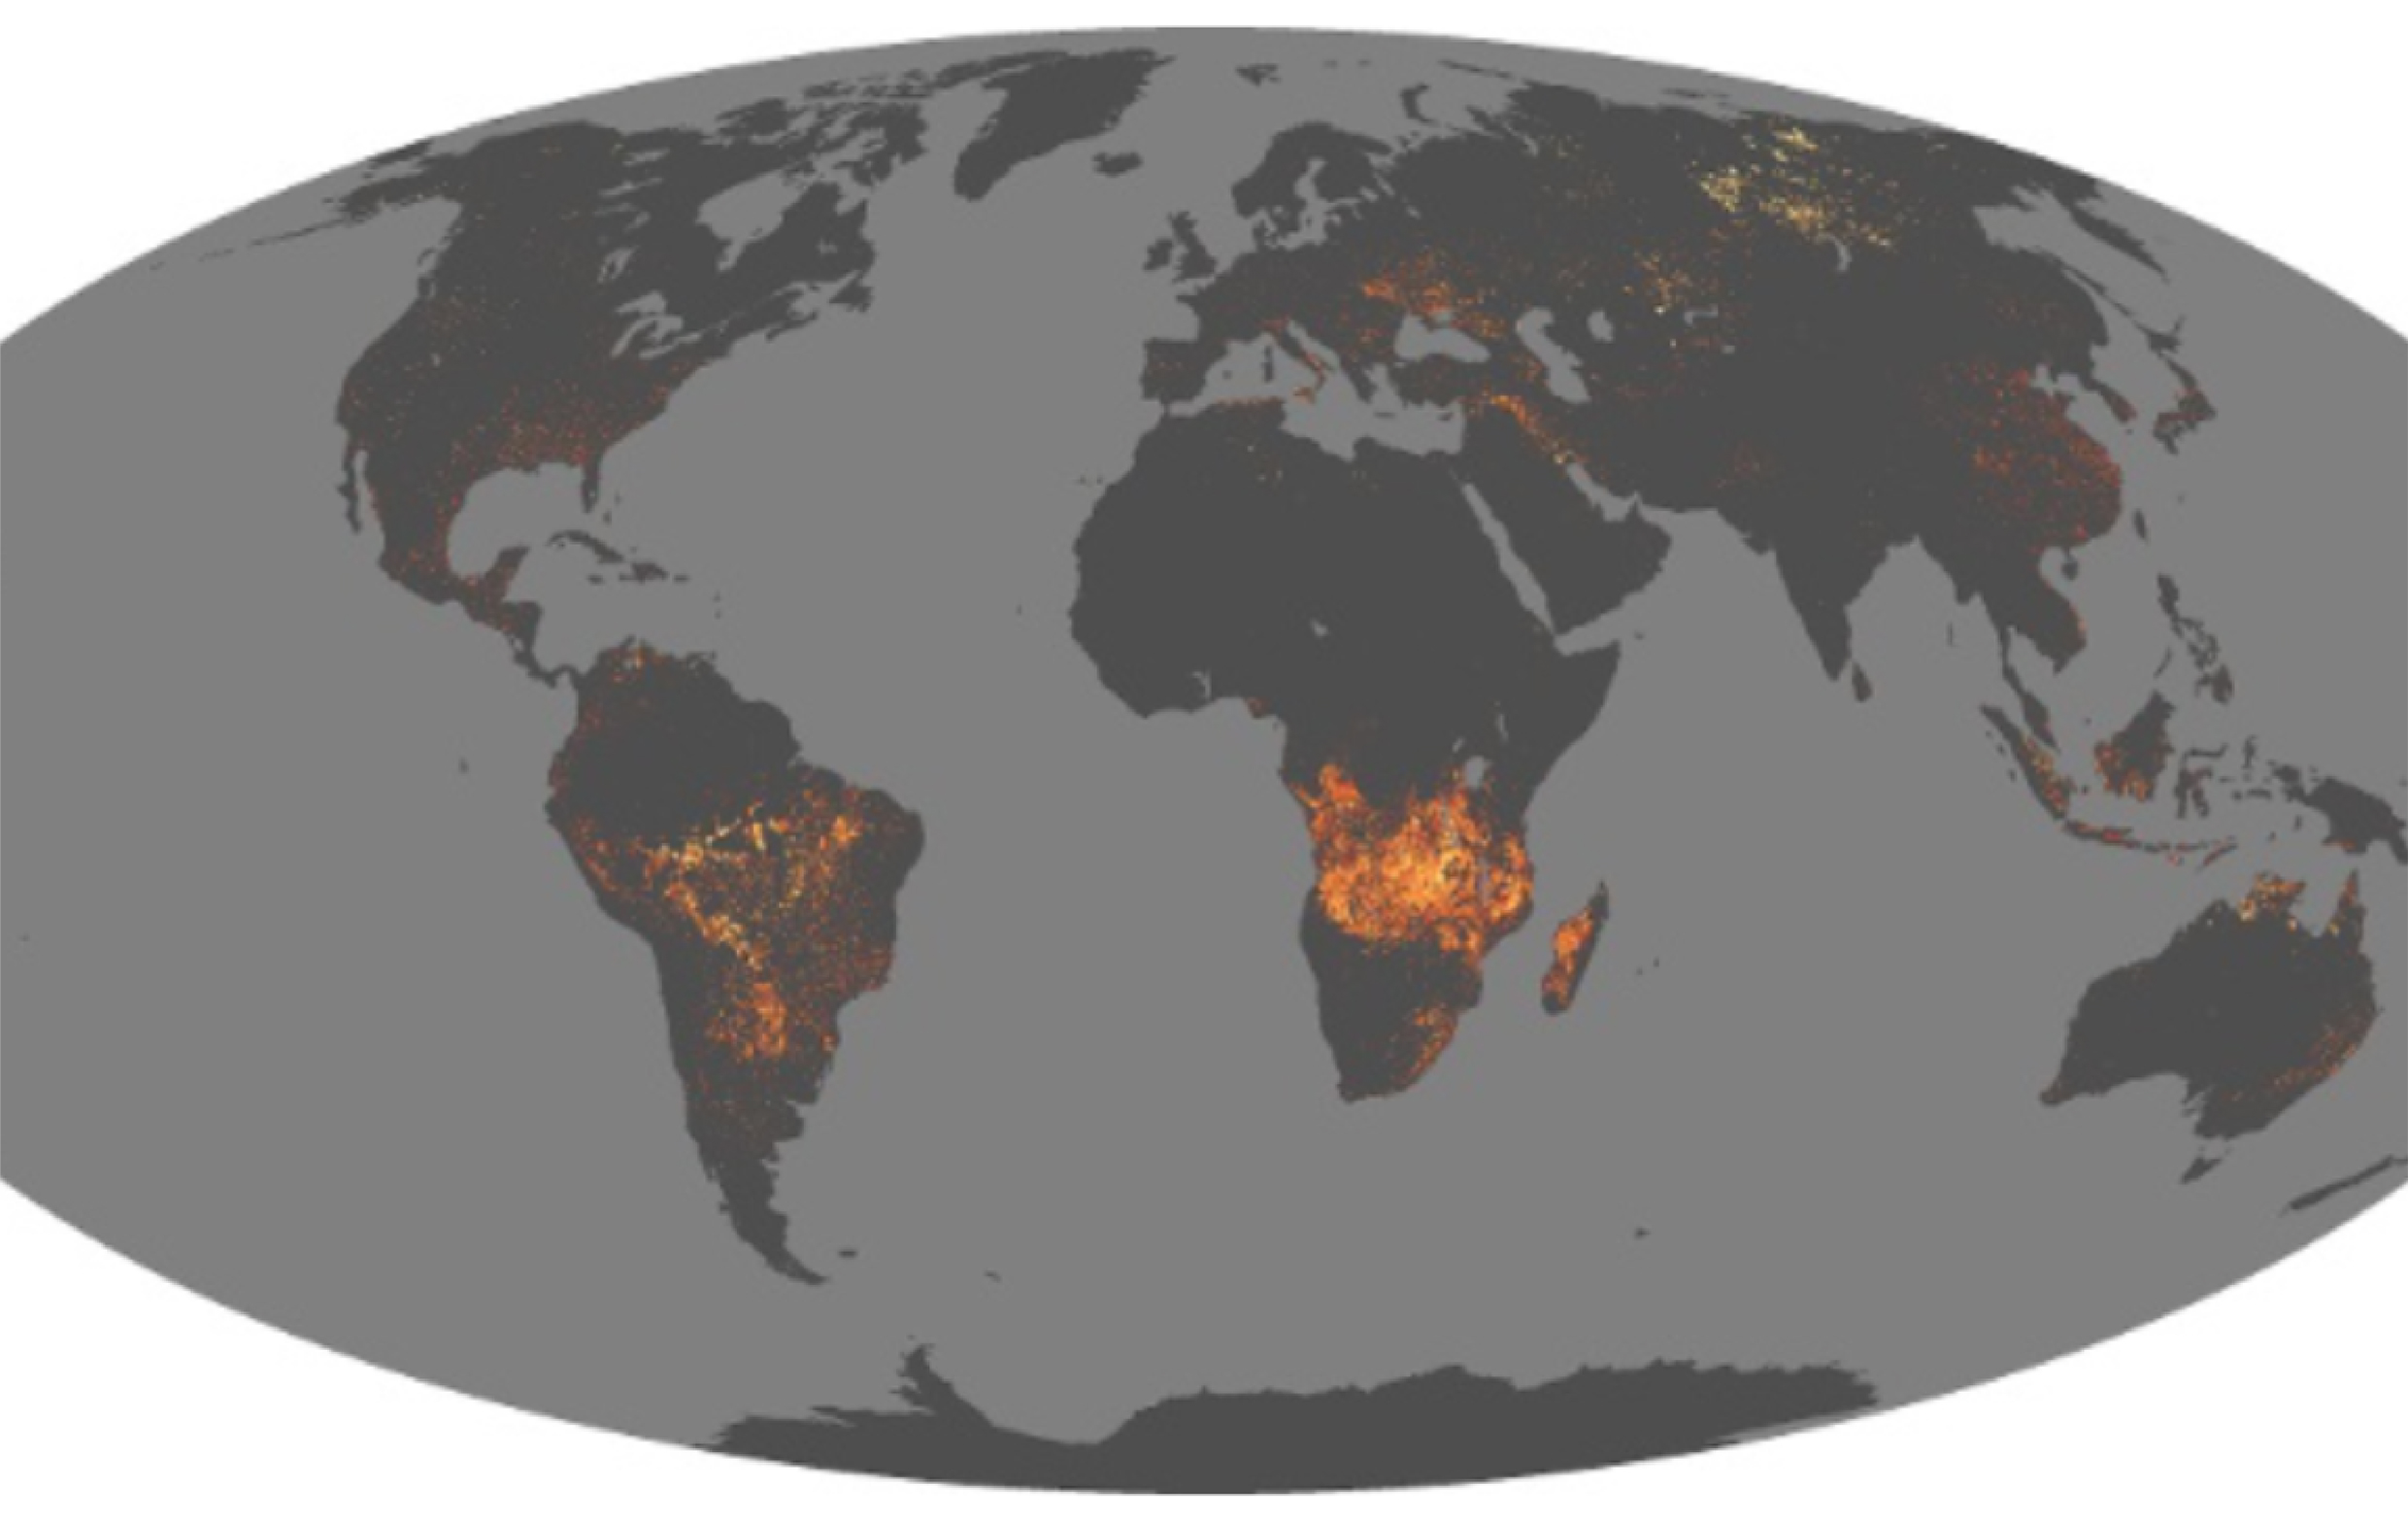 Figure 1.1.1.3 Global fire density observed from MODIS August 2019